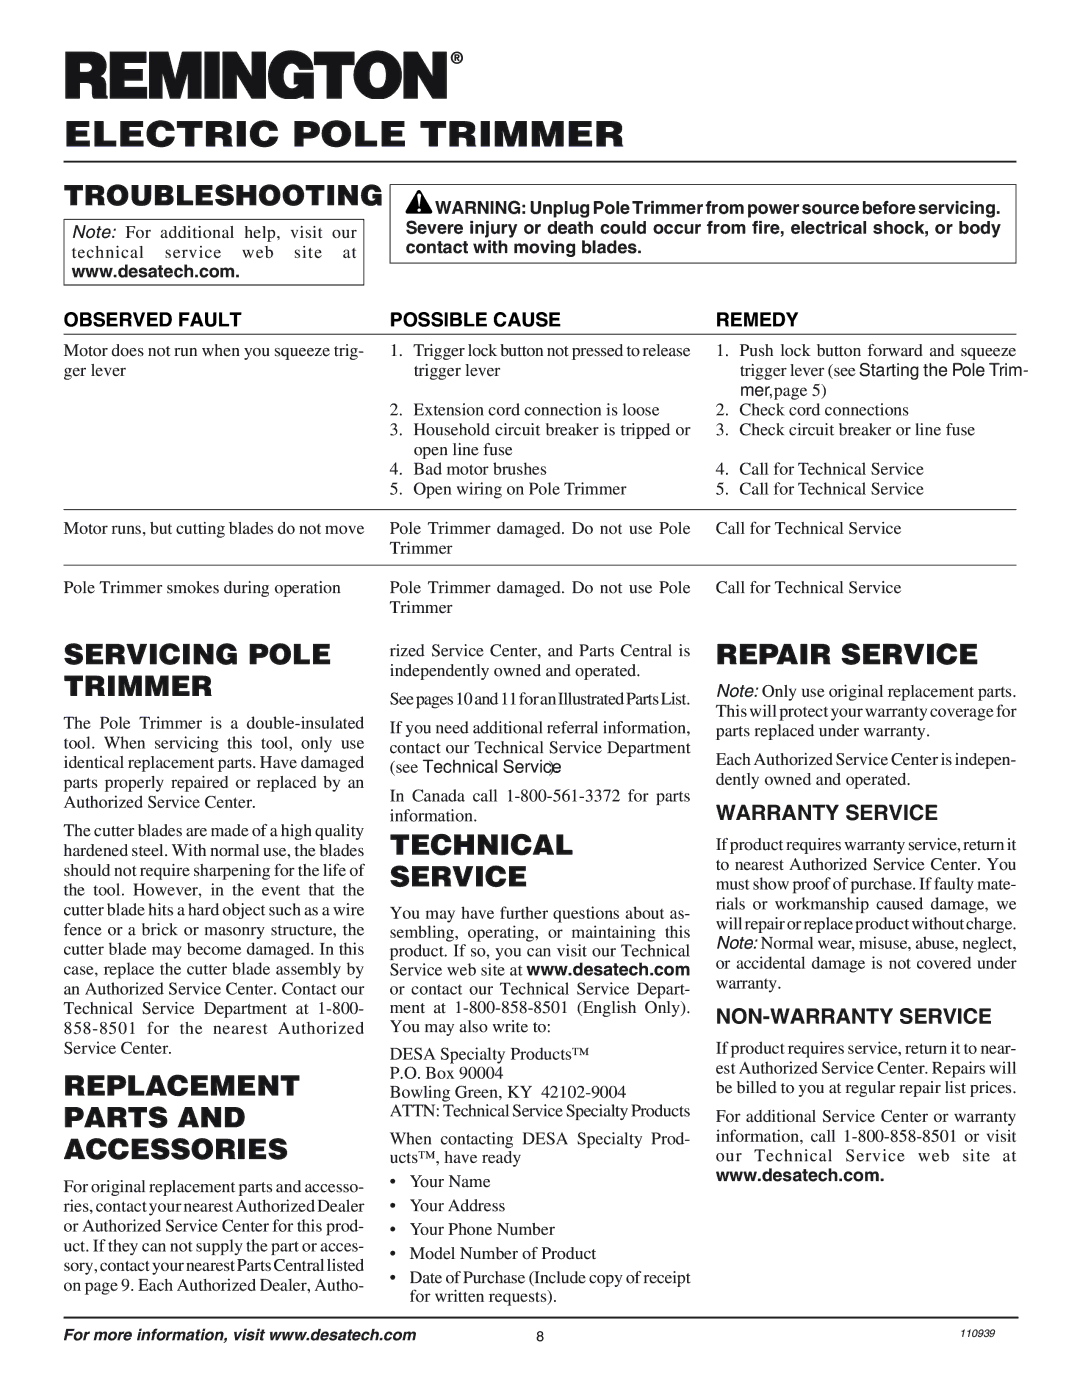 Desa 110946-01 owner manual Troubleshooting, Servicing Pole Trimmer, Replacement Parts and Accessories, Technical Service 